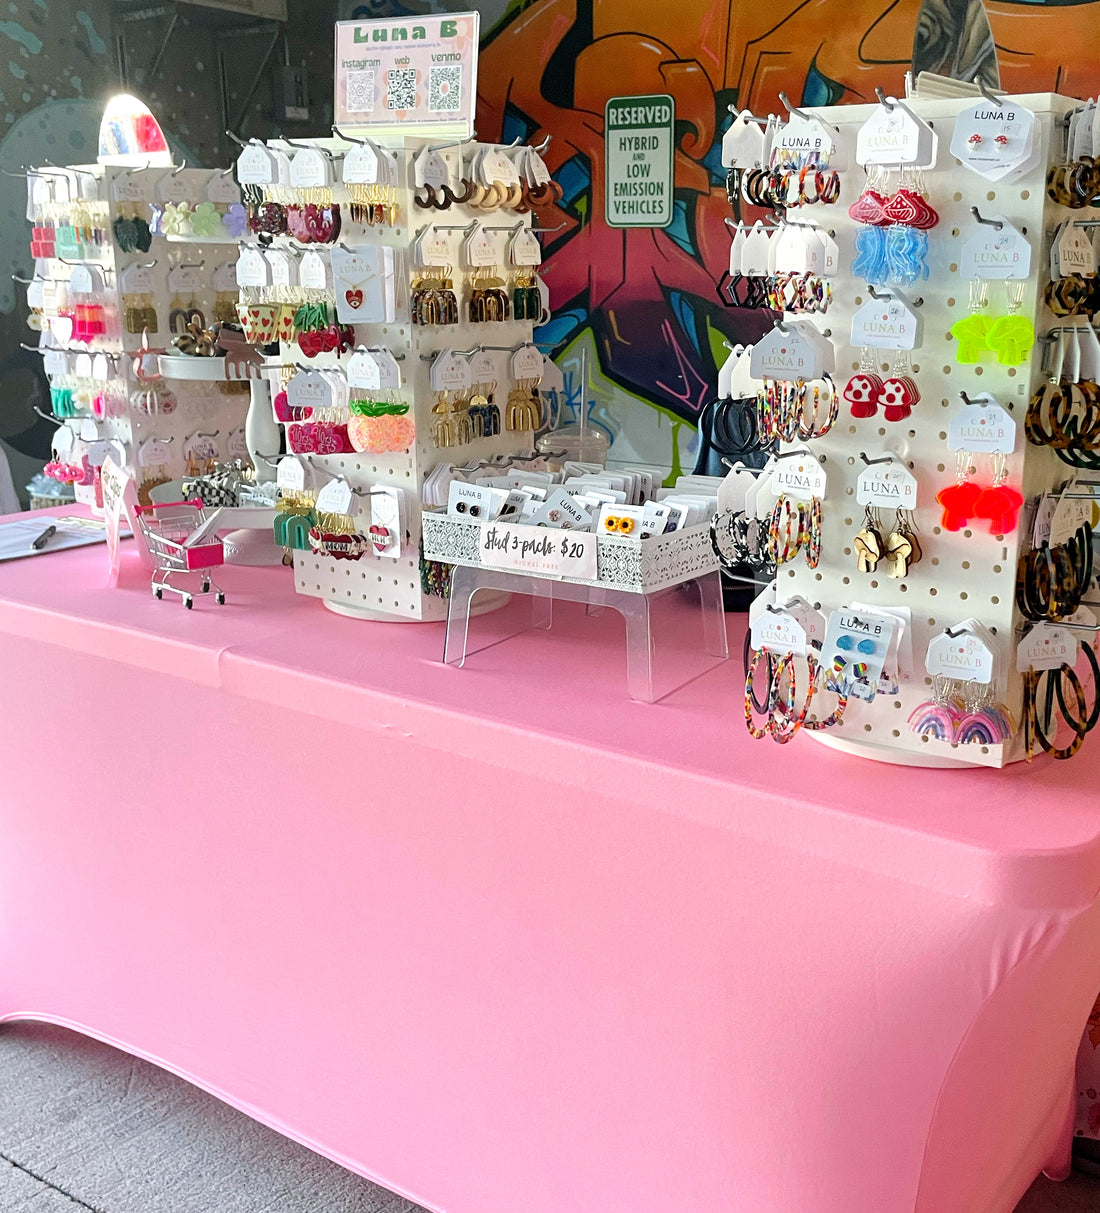 a table covered in a pink tablecloth. Three white display spinners sit on top displaying colorful acrylic jewelry for sale.